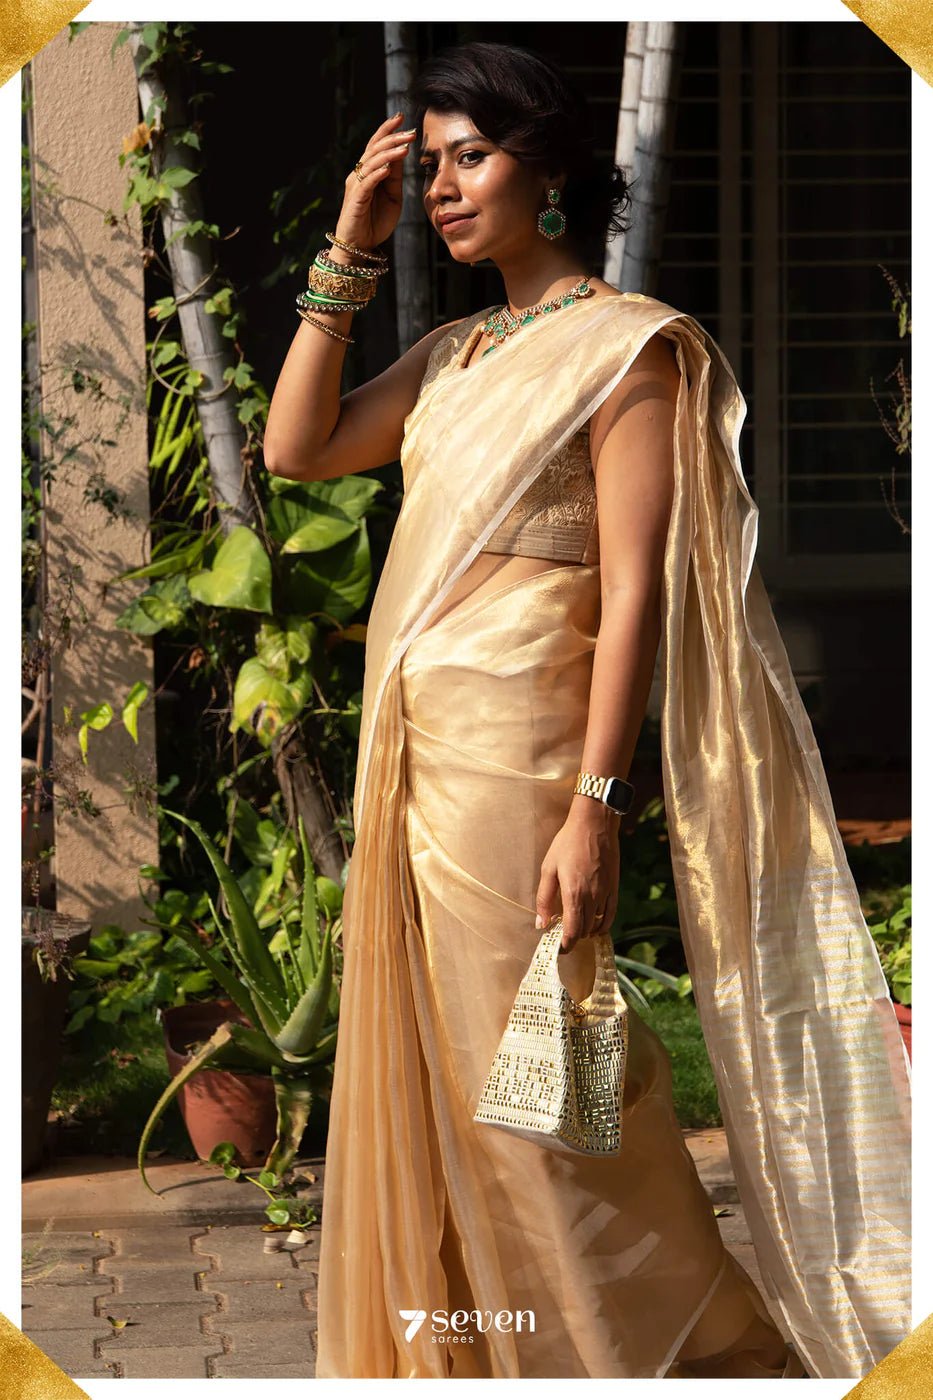 How to Care for Your Tissue Saree and Keep It Timelessly Beautiful - Seven Sarees